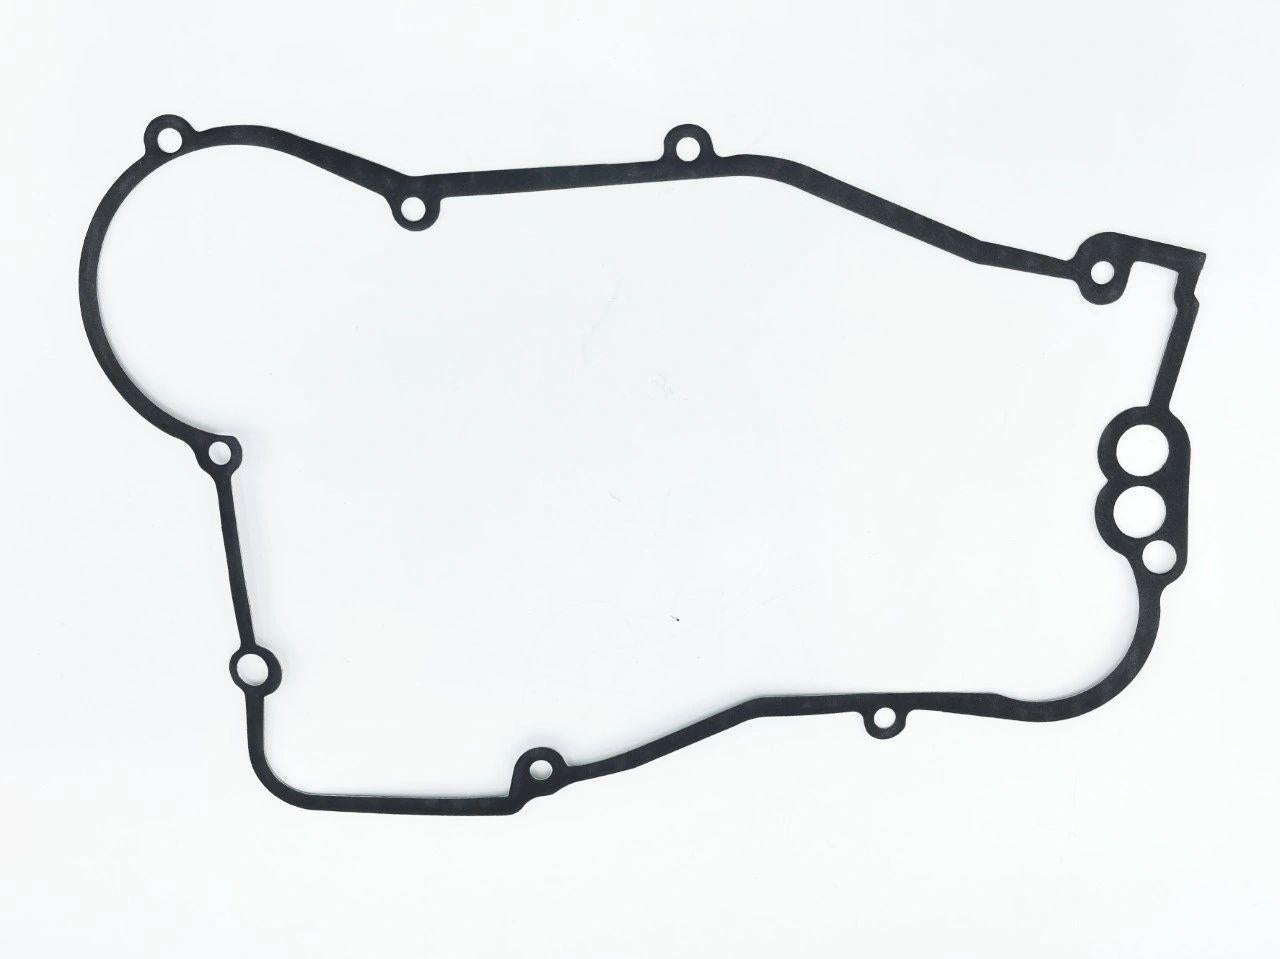 Clutch Cover Gasket - 0/000.490.9108